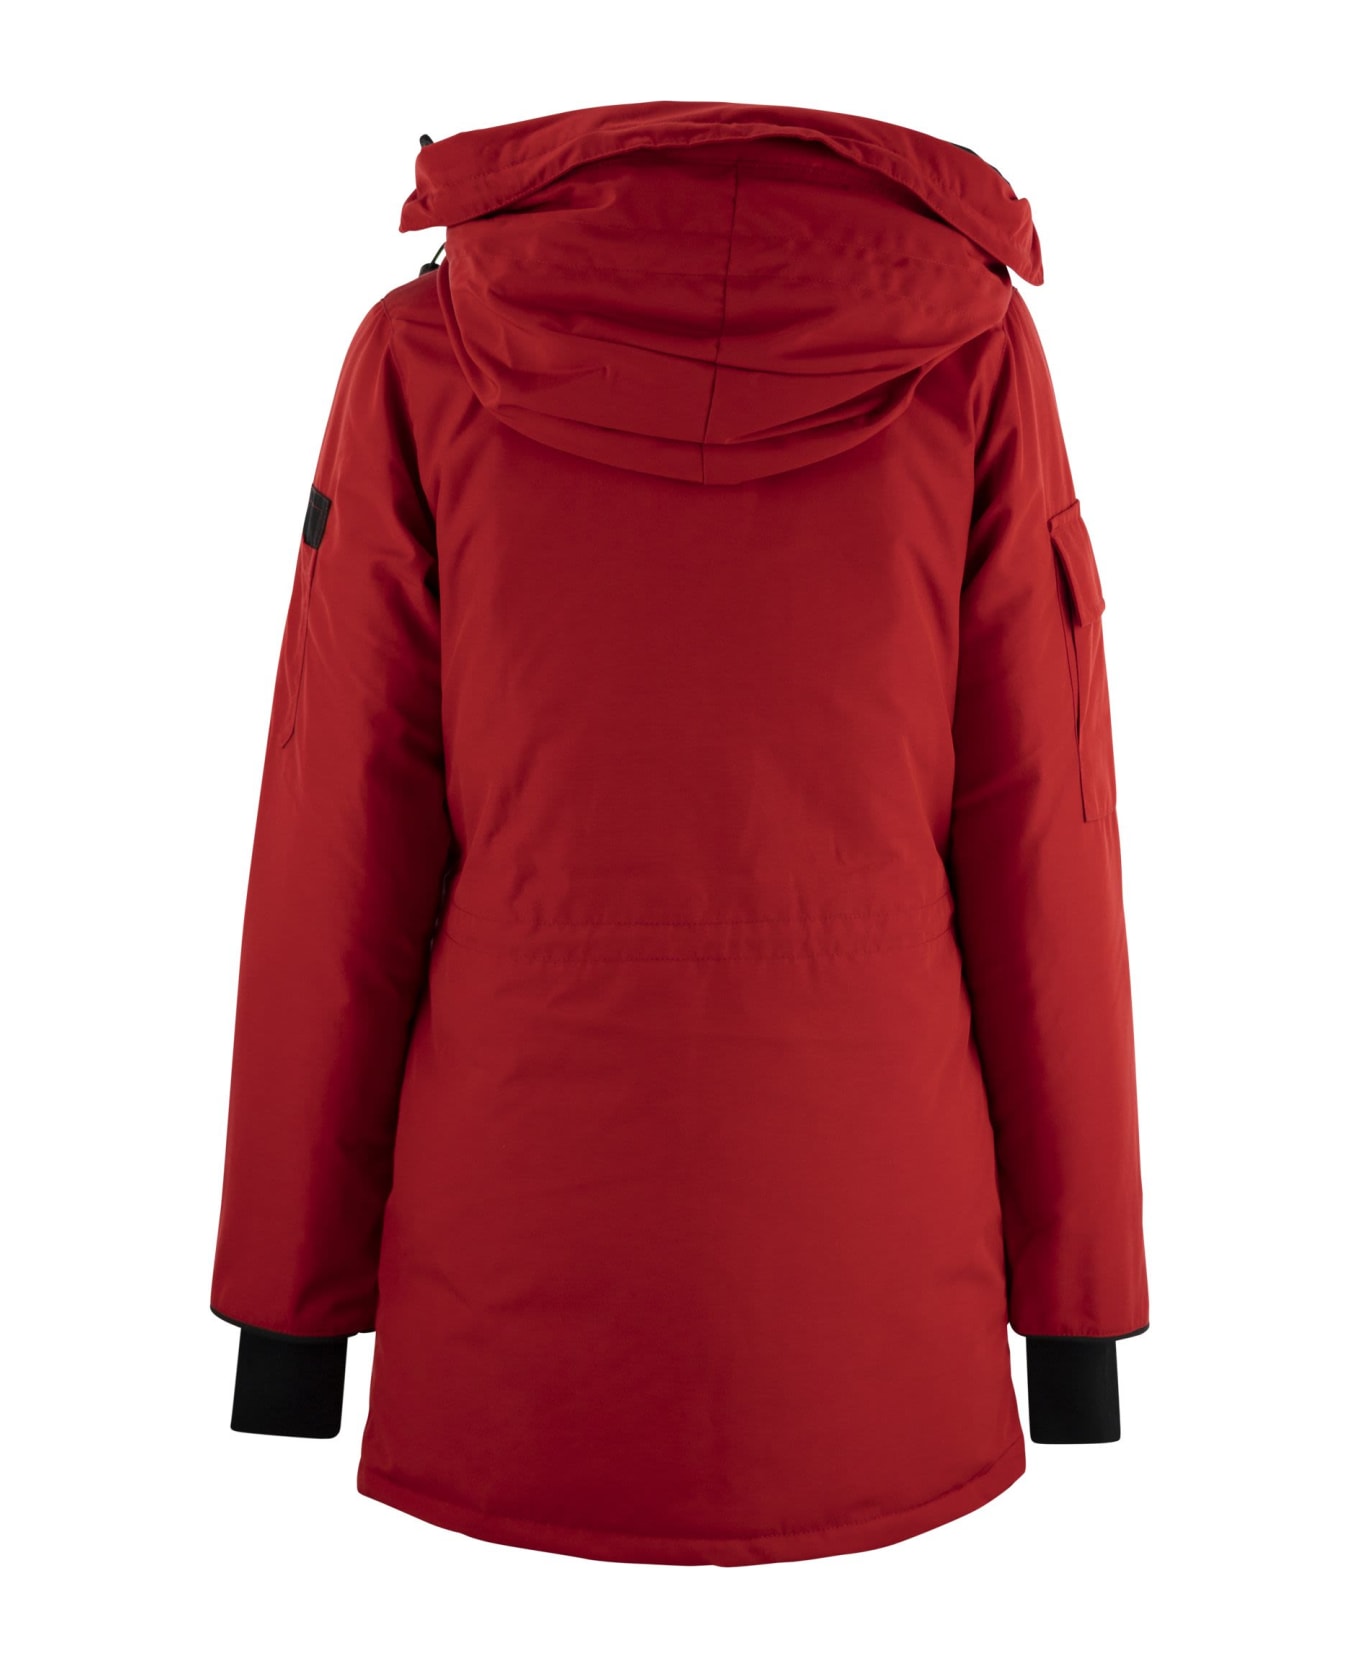 Canada Goose Expedition - Fusion Fit Parka - Red